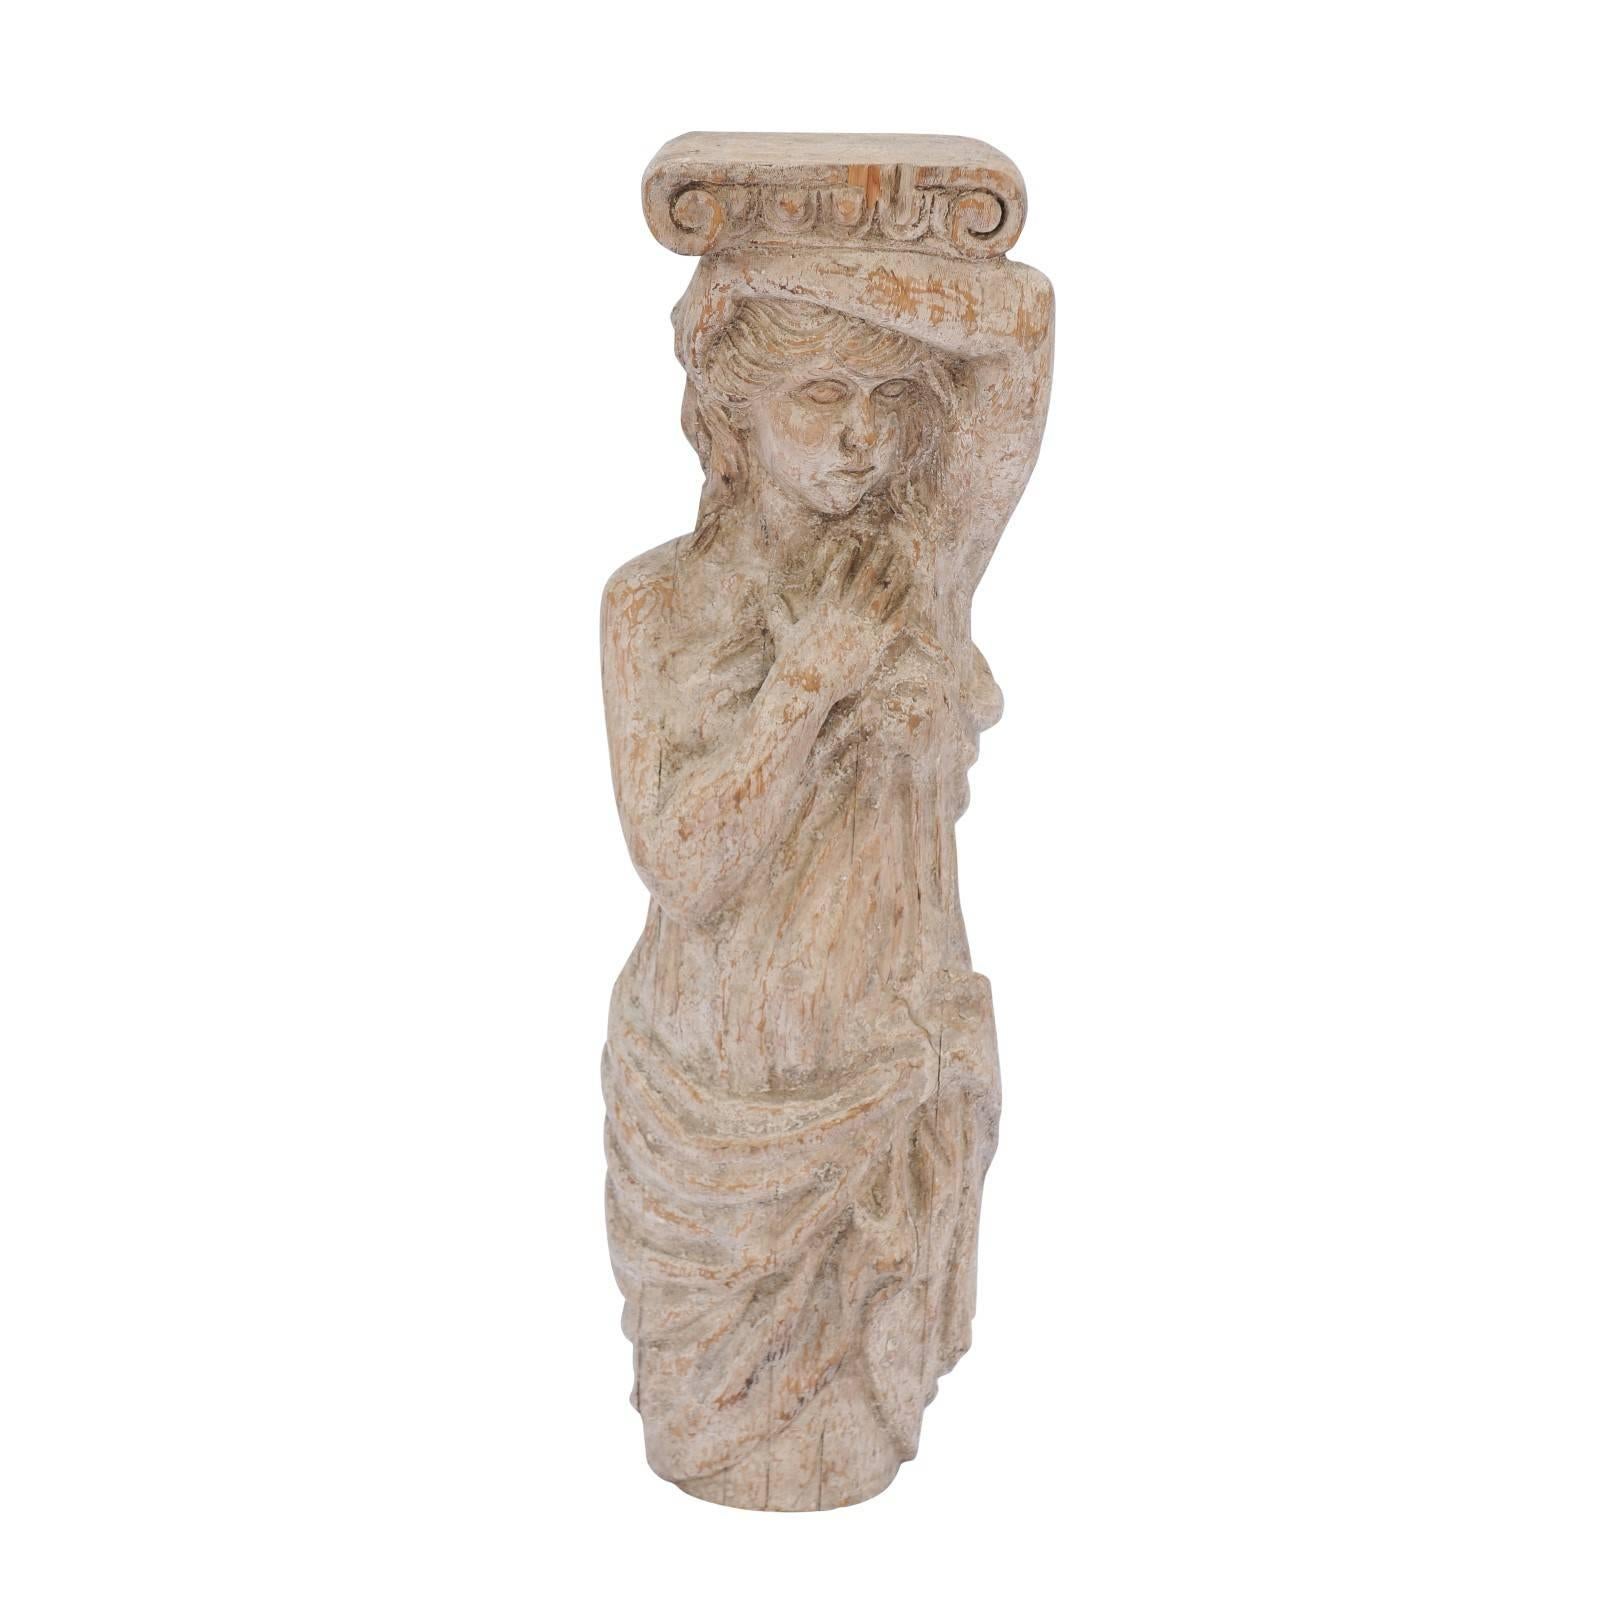 French Late 18th Century Wooden Caryatid Sculpture of a Woman with Ionic Capital